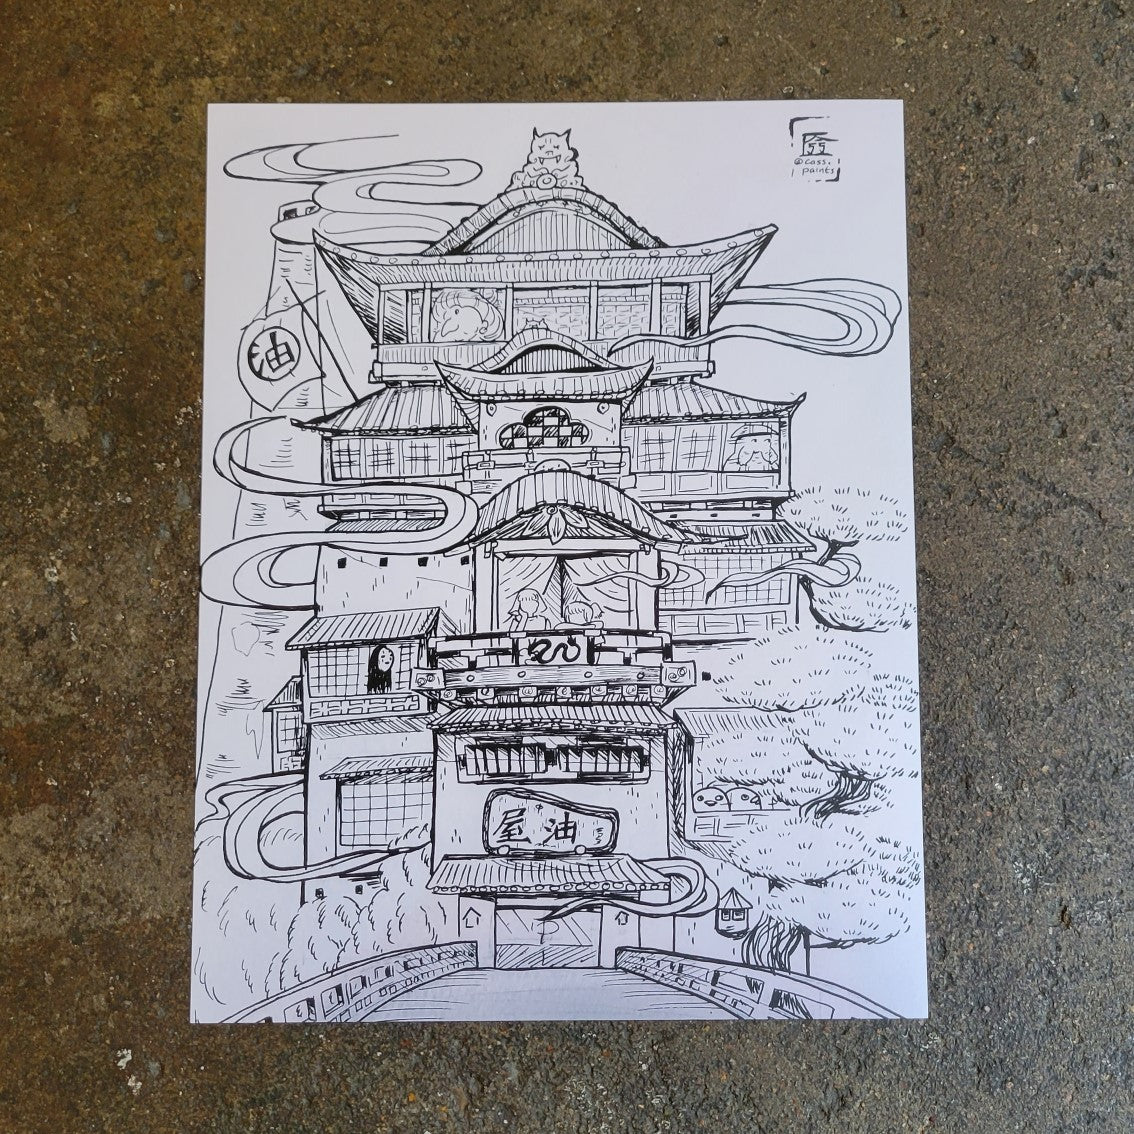 Spirited Away Inspired Print featuring the Tea House in a black and white print